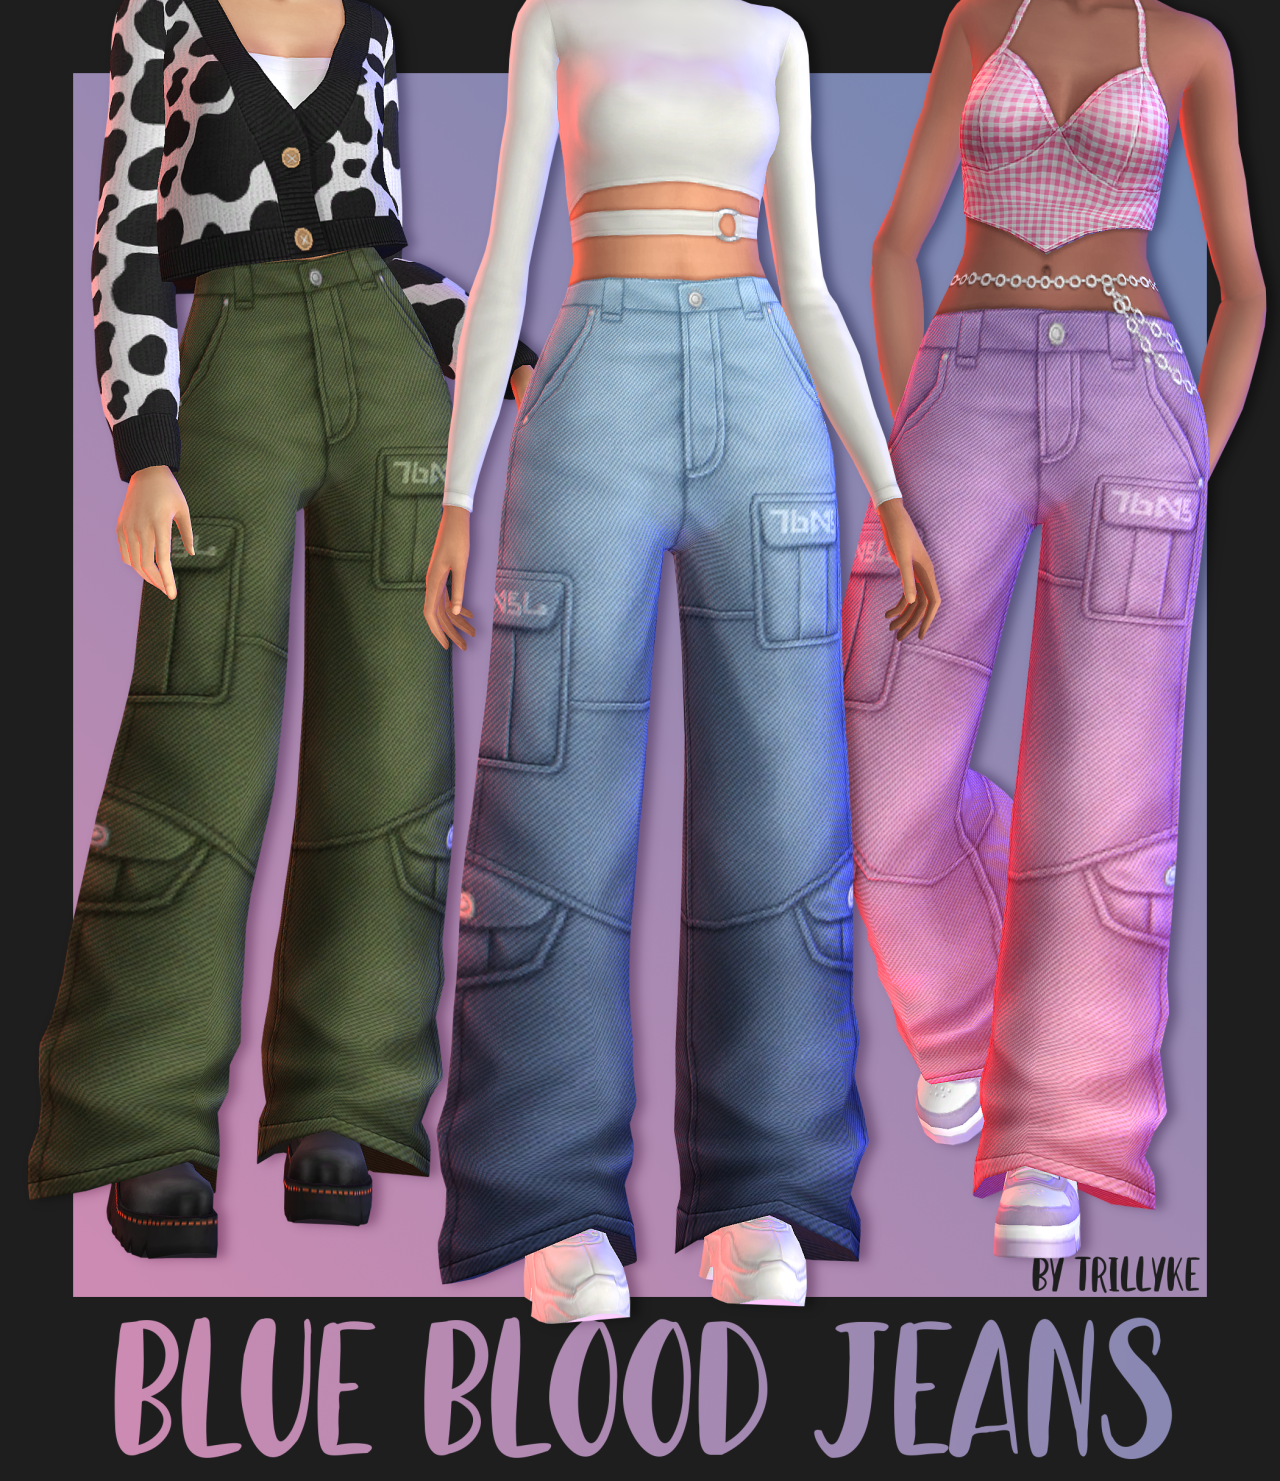 ✩ Trillyke ✩ — Blue Blood Jeans Stylish 2YK inspired baggy